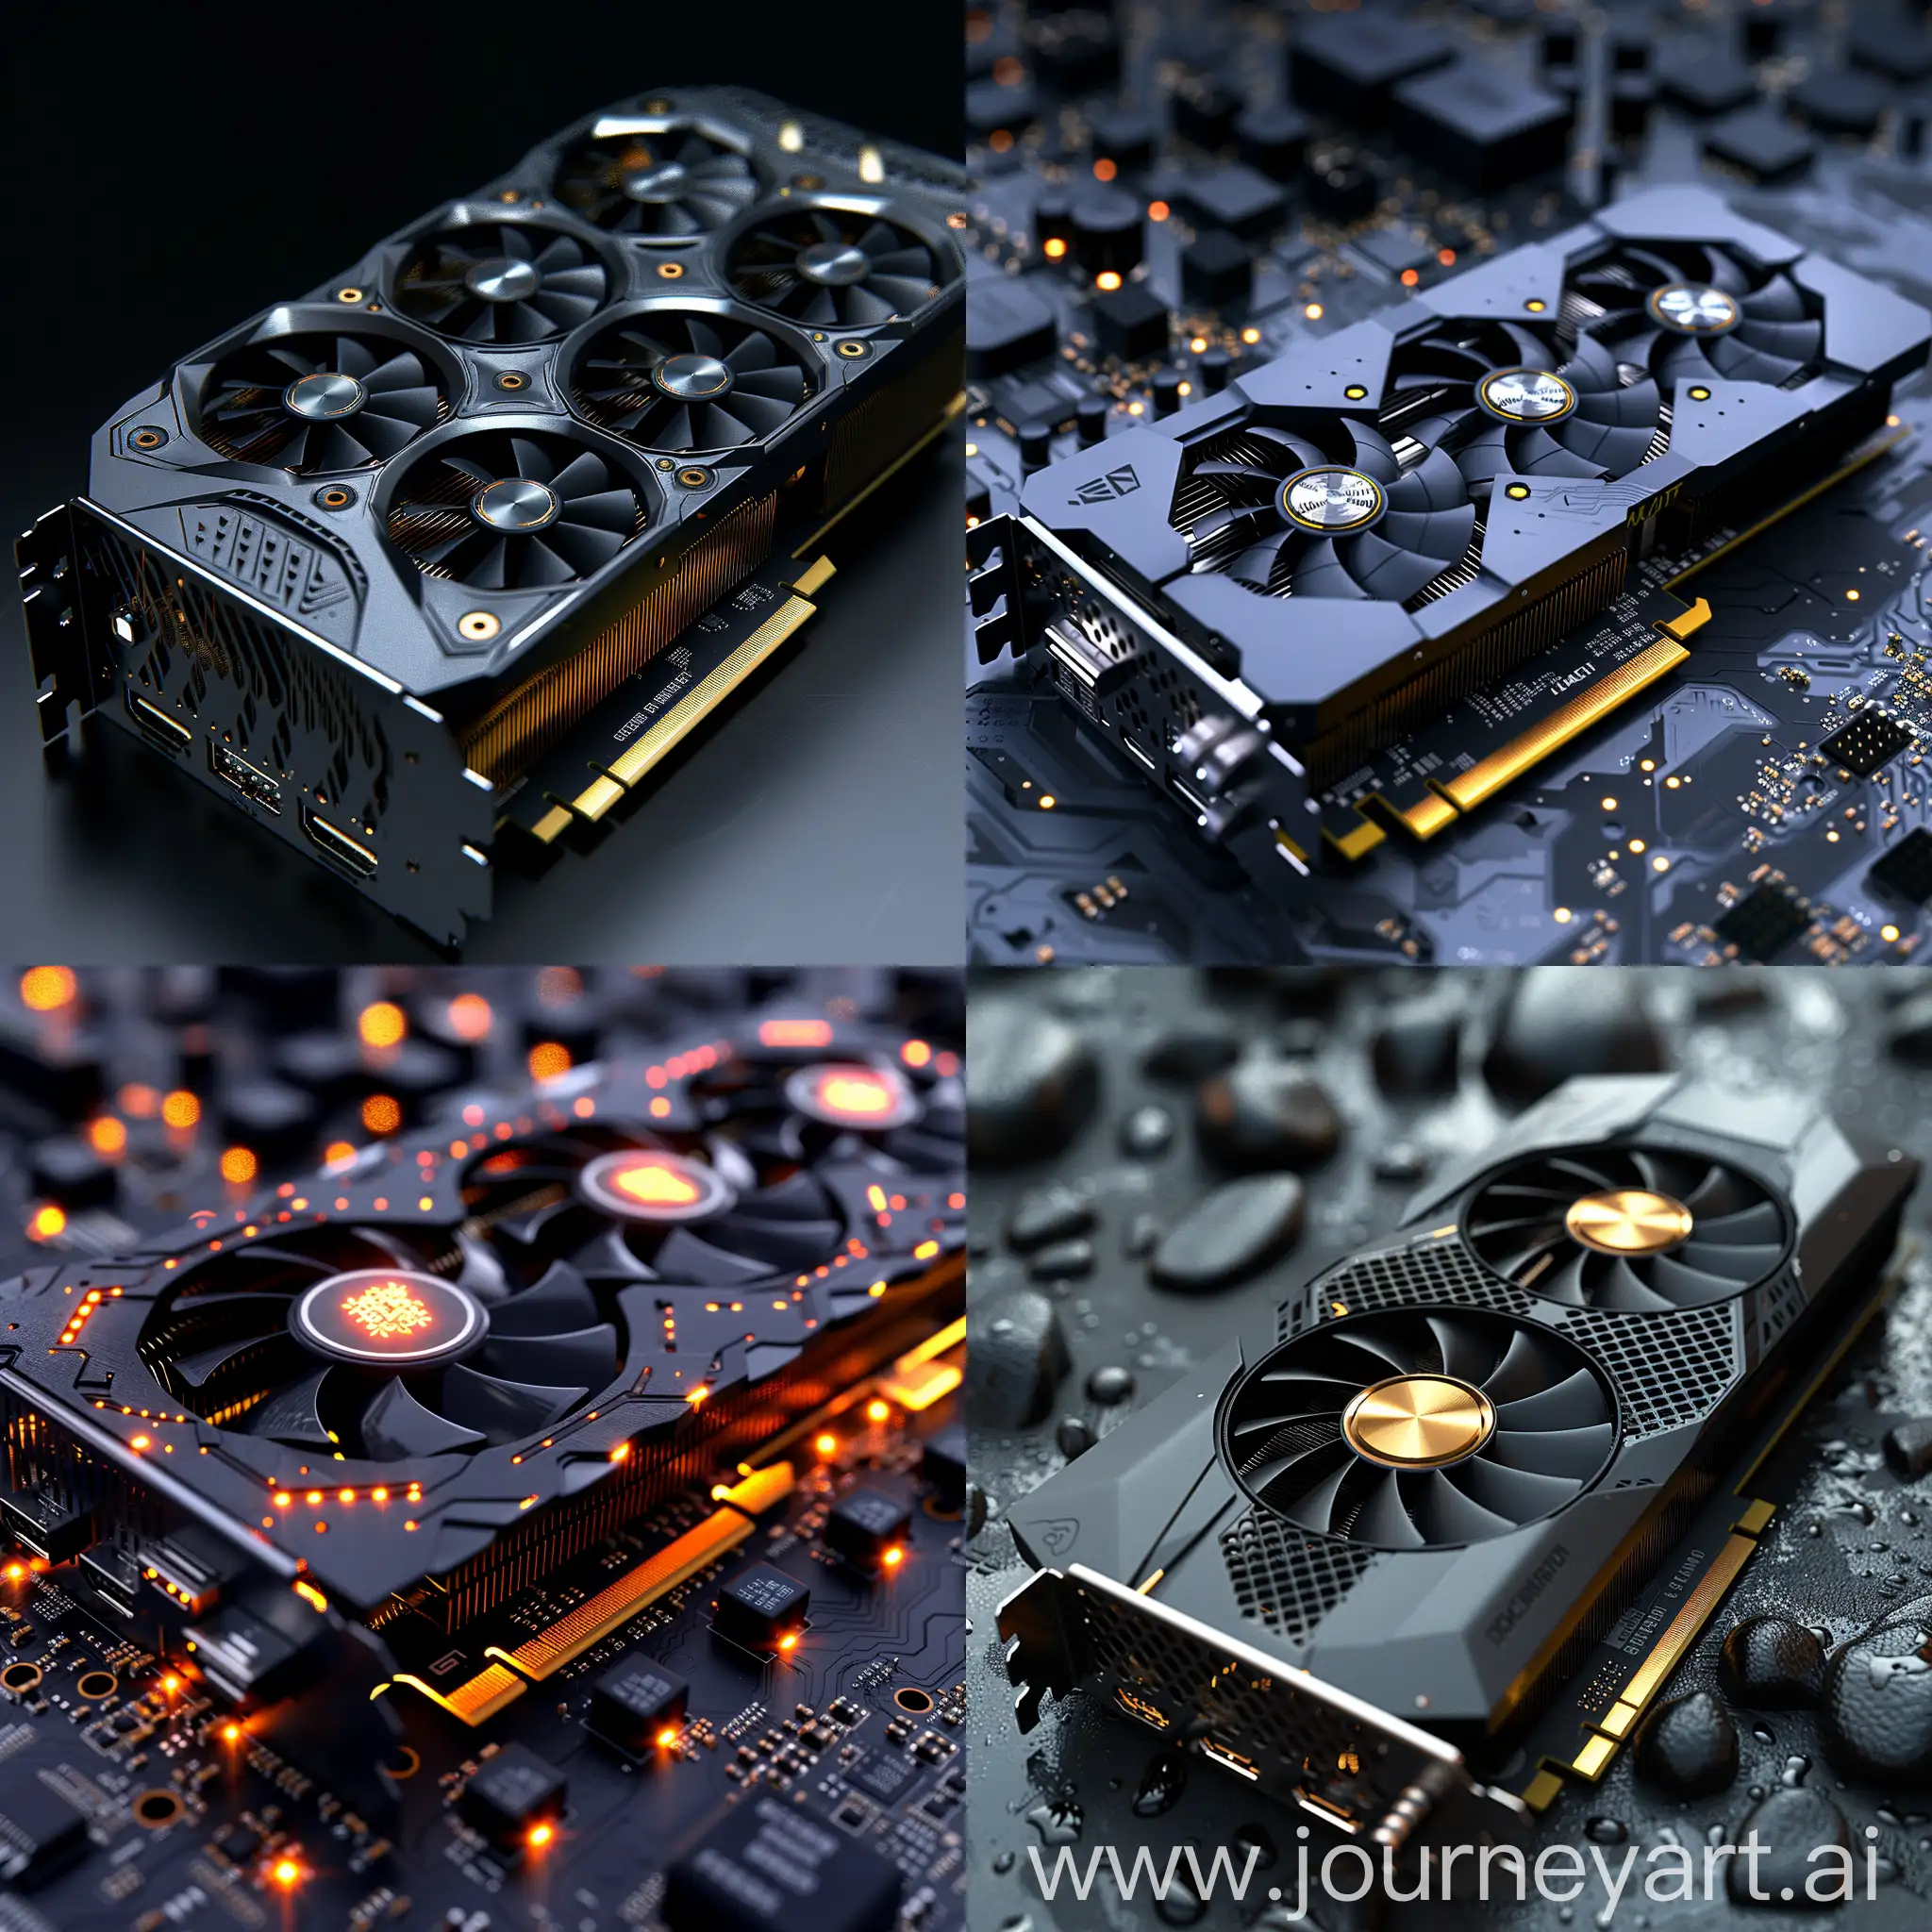 Sustainable-Nanotechnology-Graphics-Card-EcoFriendly-Design-for-Futuristic-Computing